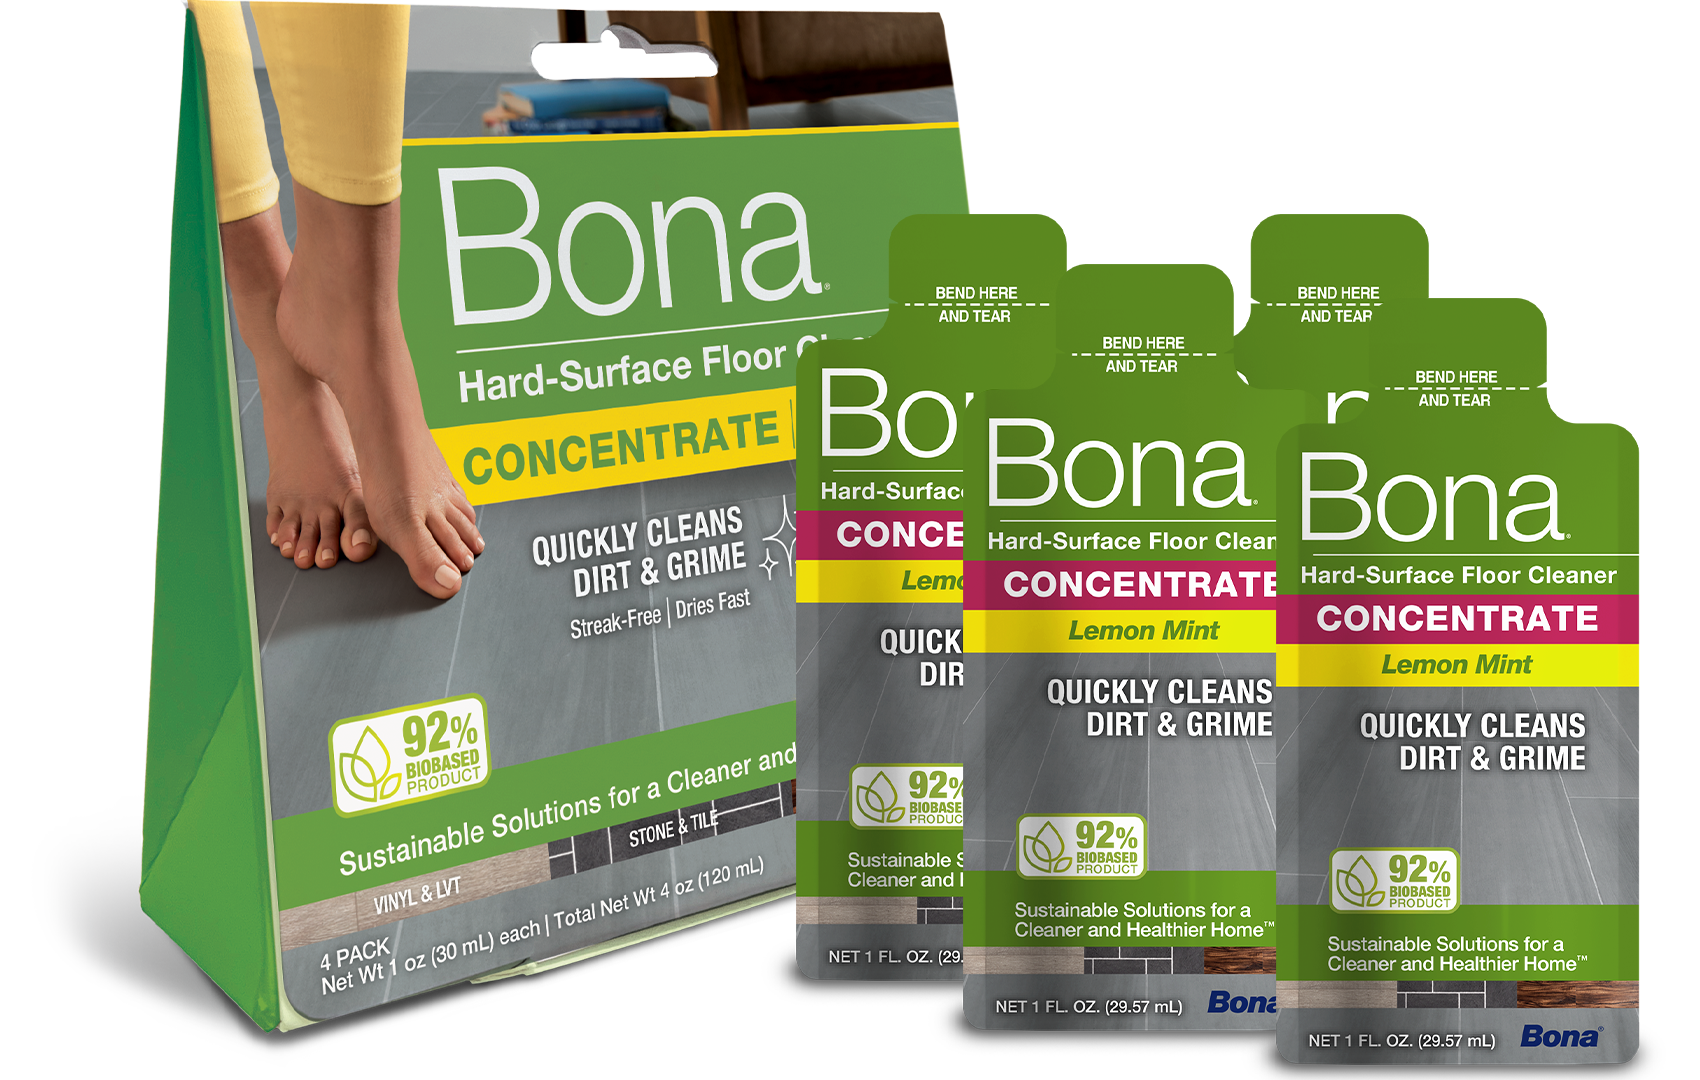 The New Scent of Clean - Bona Hard-Surface Floor Cleaner with Lemon Mint 